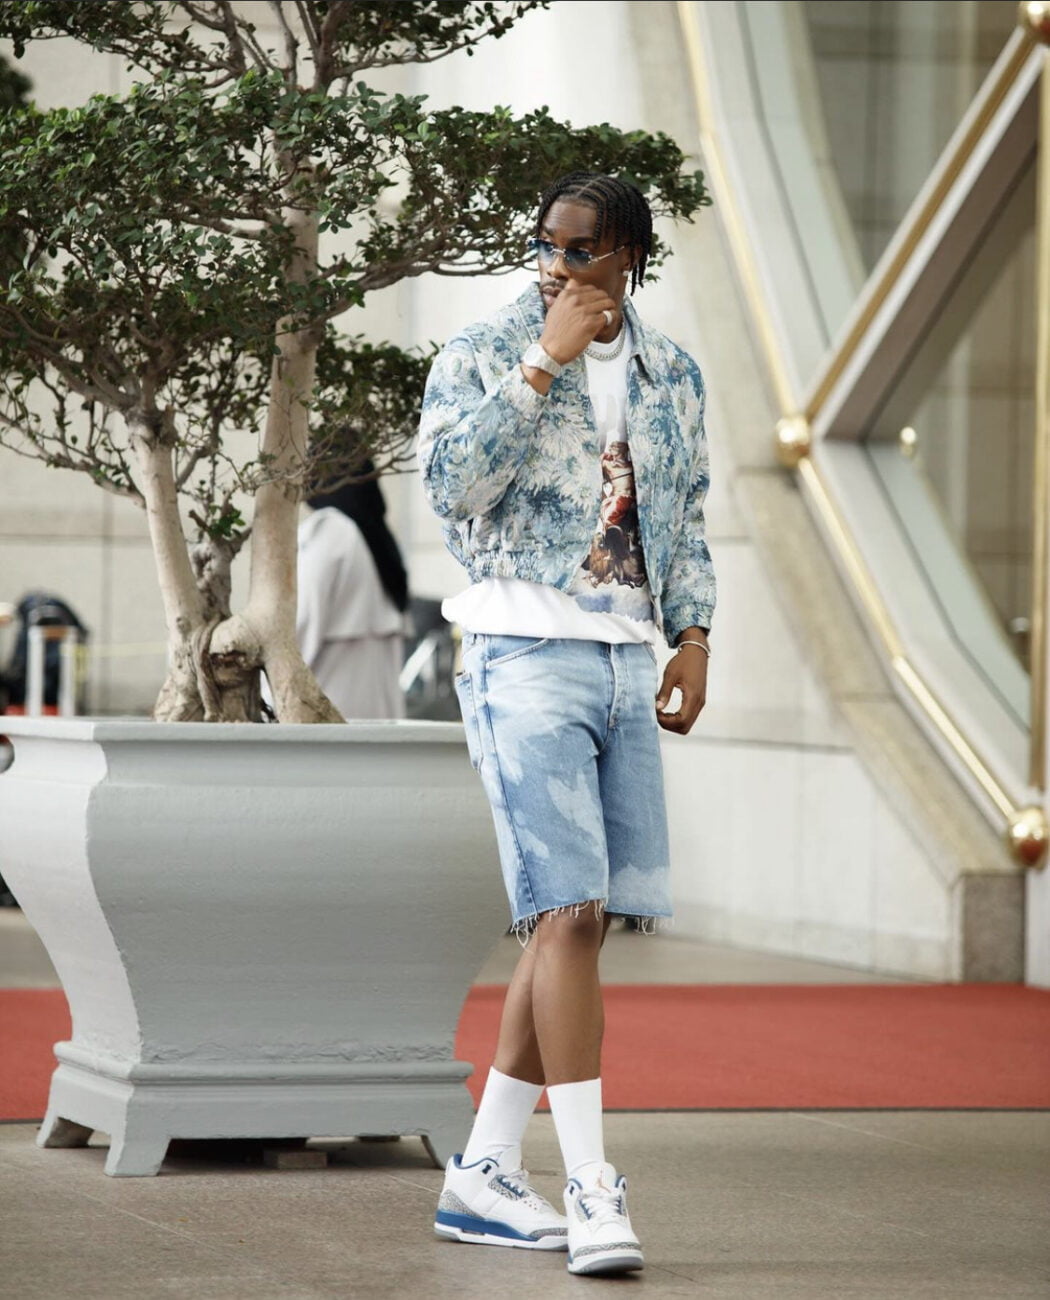 Neo Akpofure in a denim jacket, paired with denim shorts.